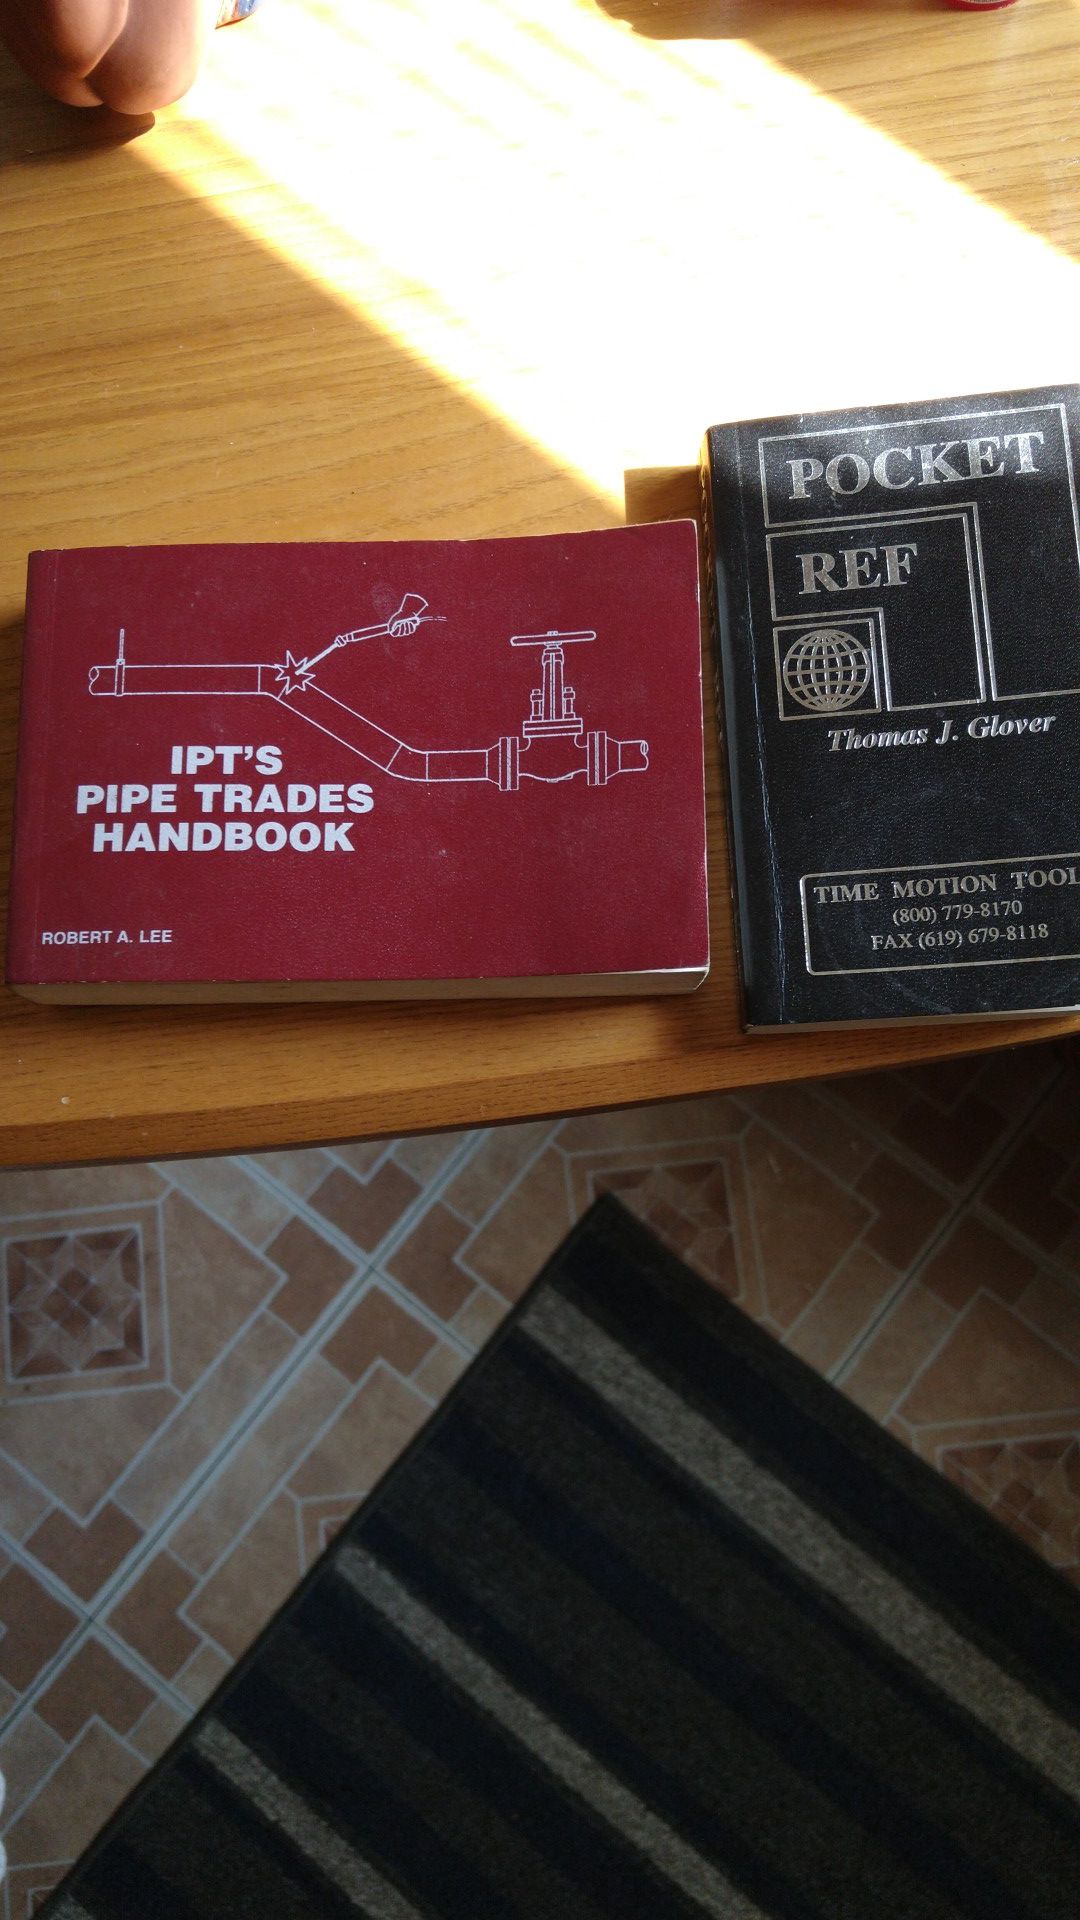 Two handy Pipe and metal craftsTrade books